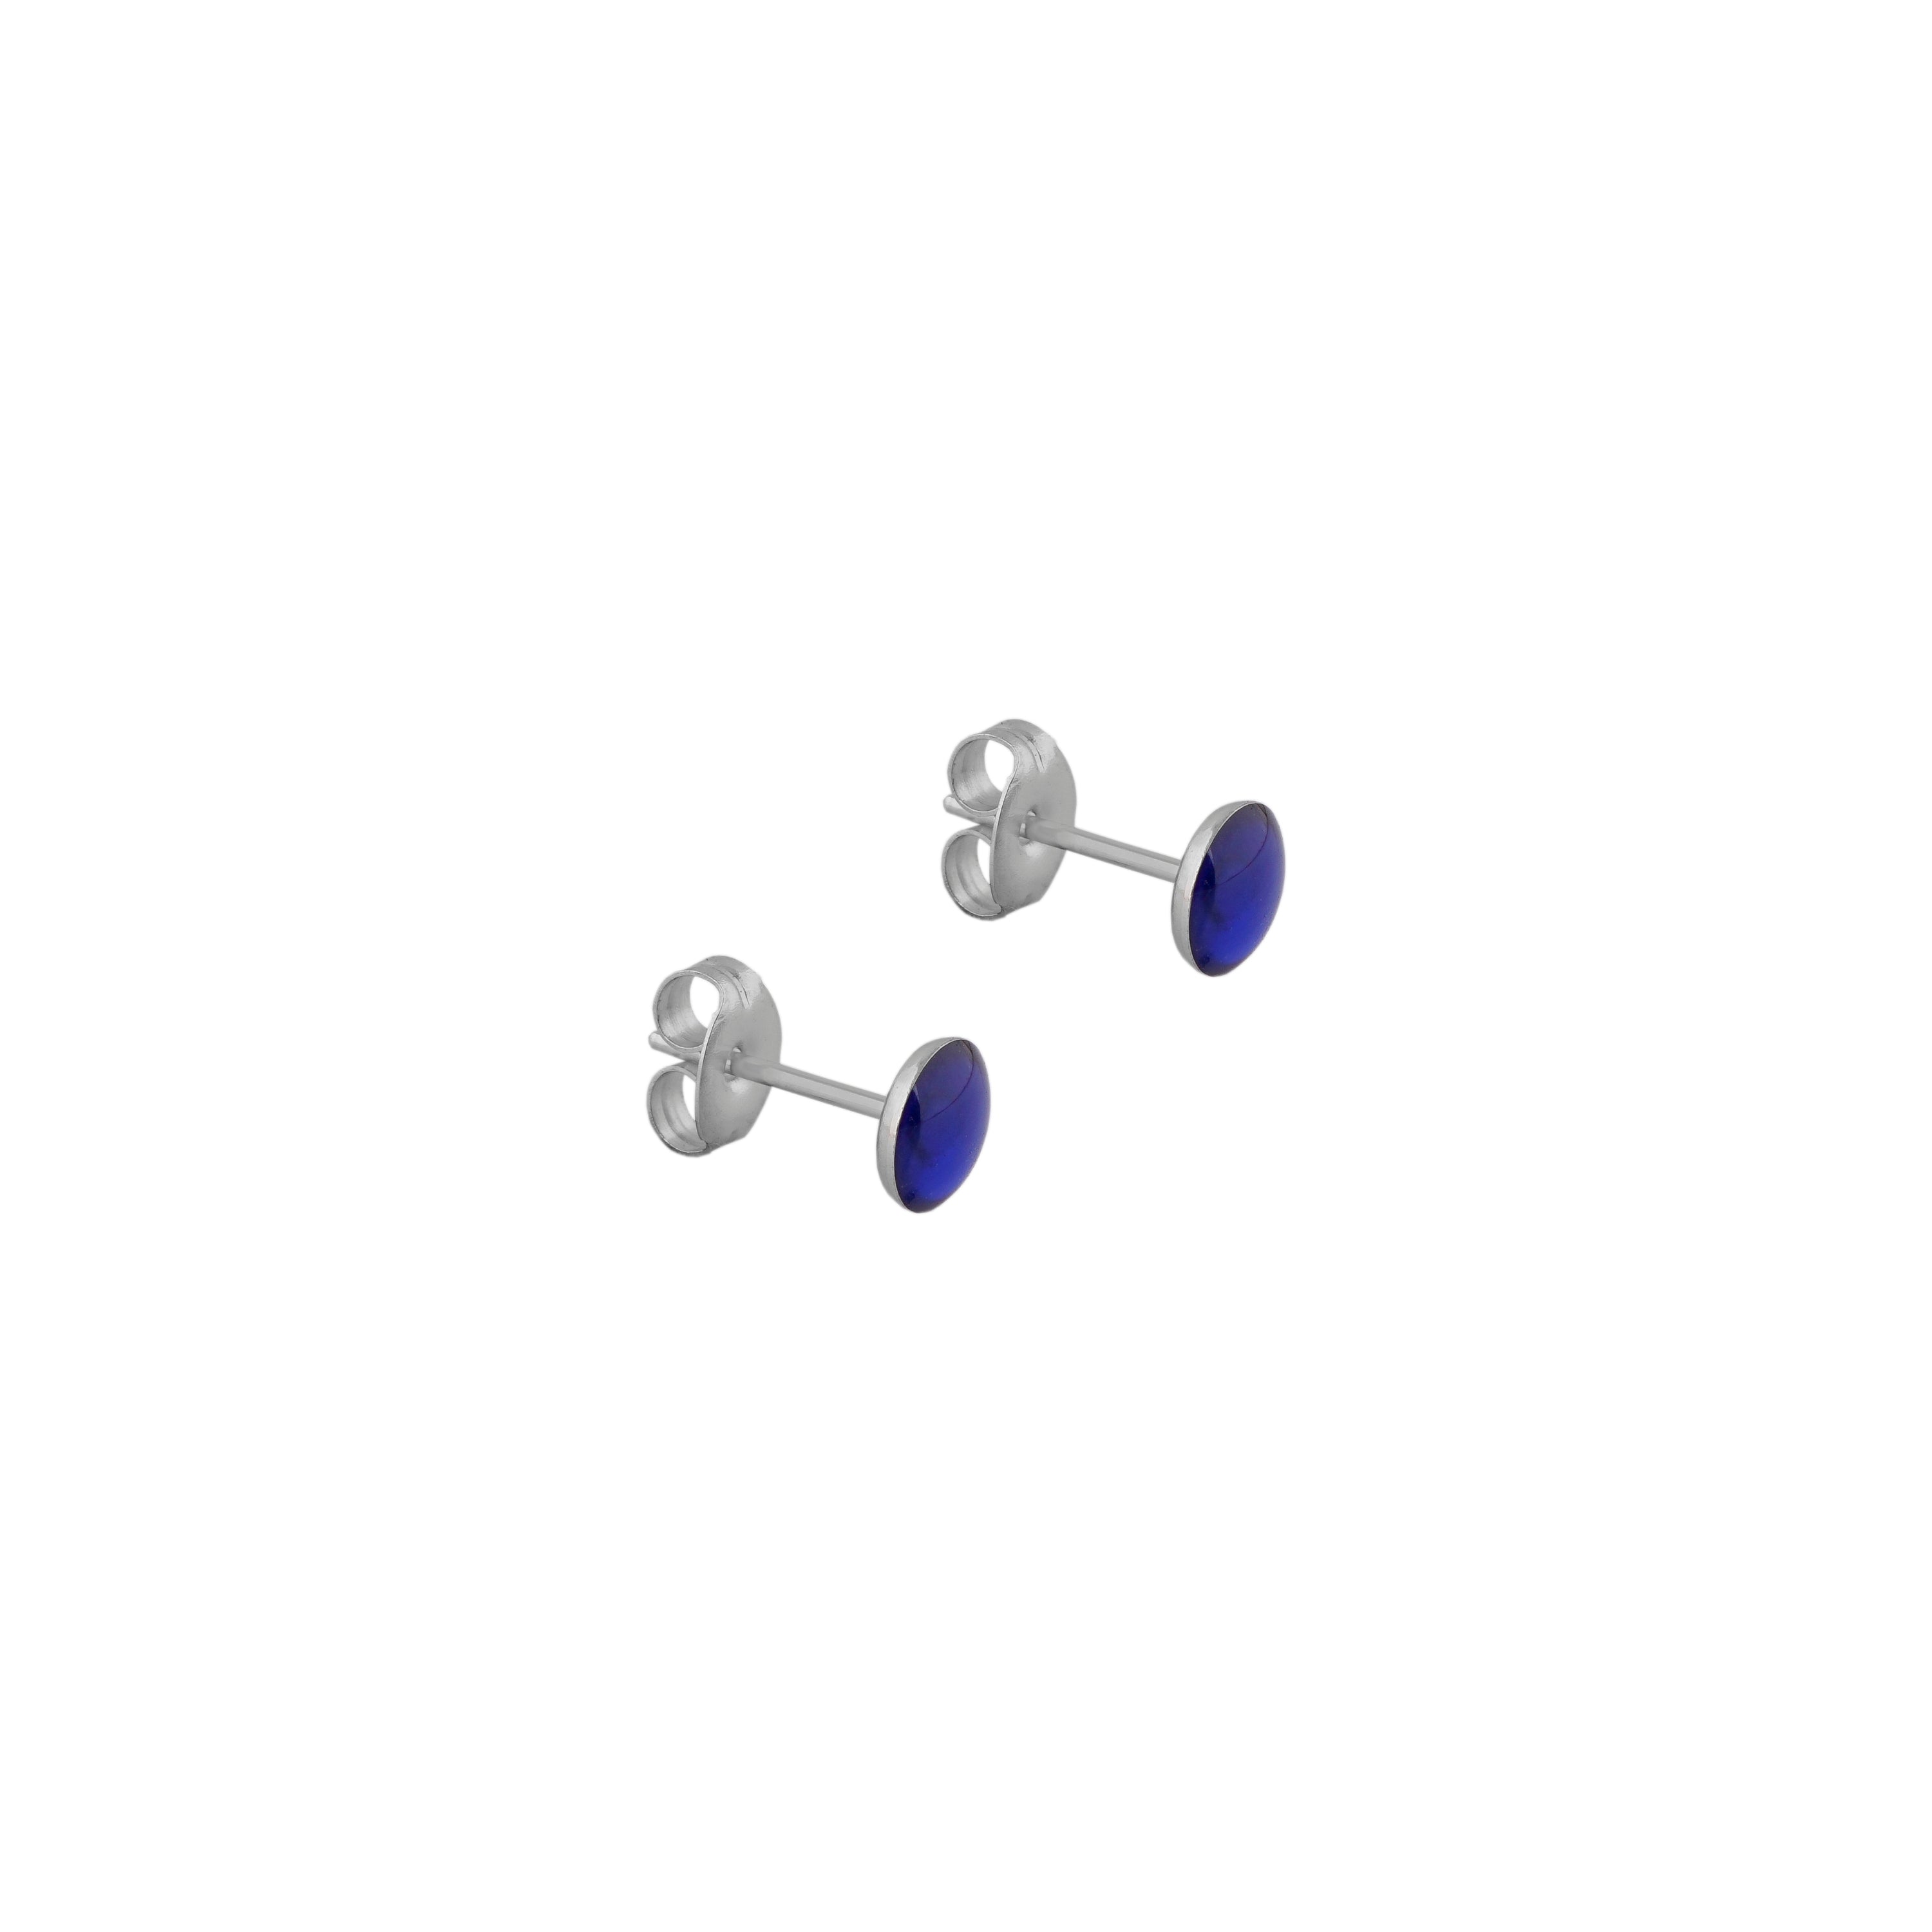 5MM Novelty Neon Blue Allergy free Stainless Steel Ear Studs | MADE IN USA | Ideal for everyday wear